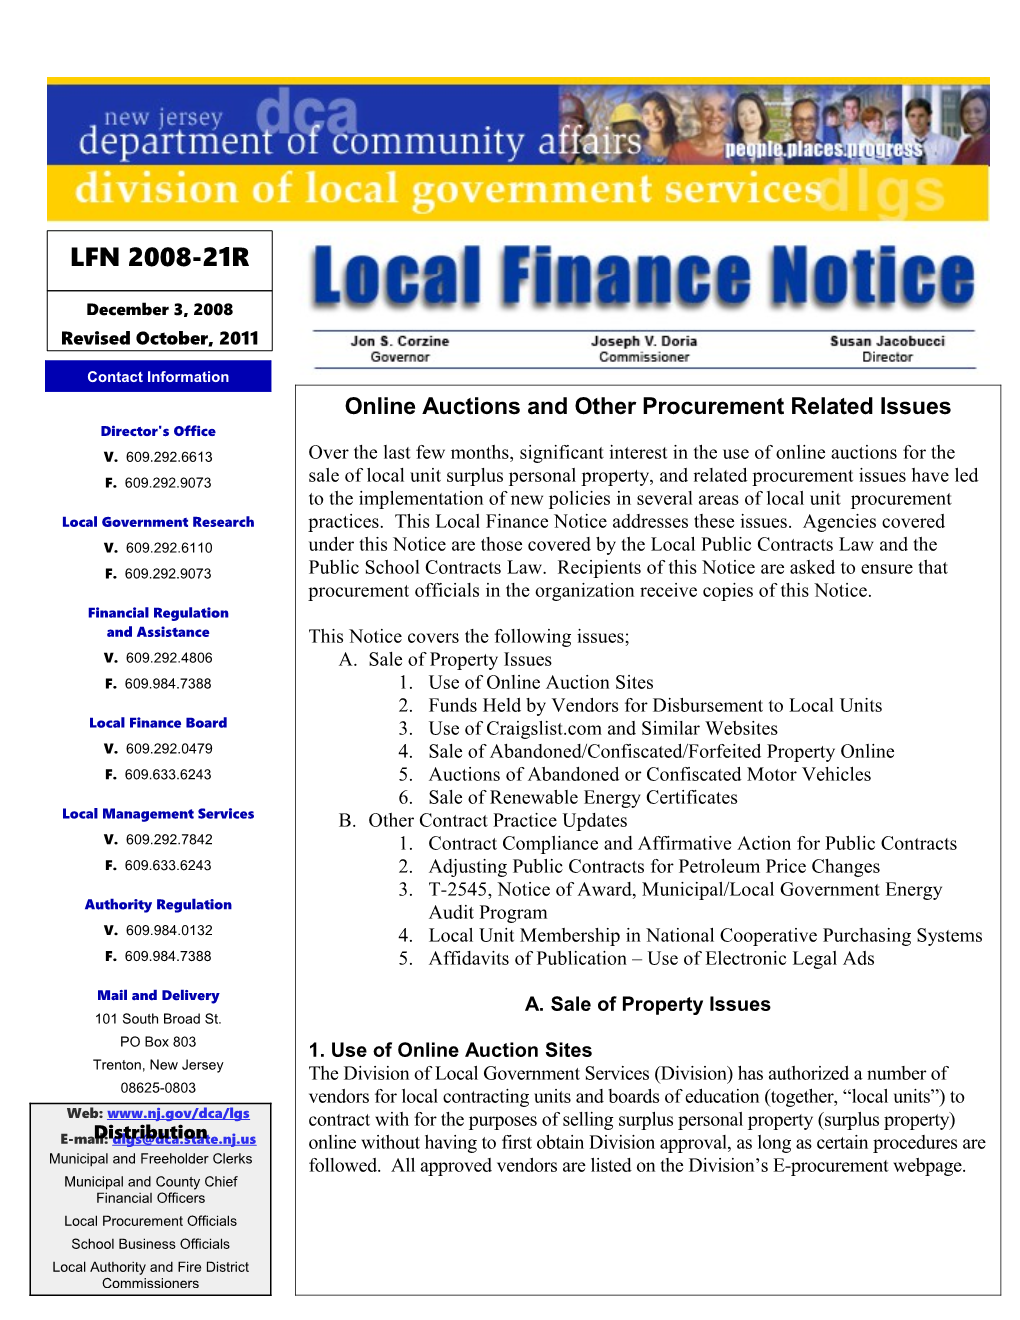 Local Finance Notice 2008-21Roctober 2011 Page 1